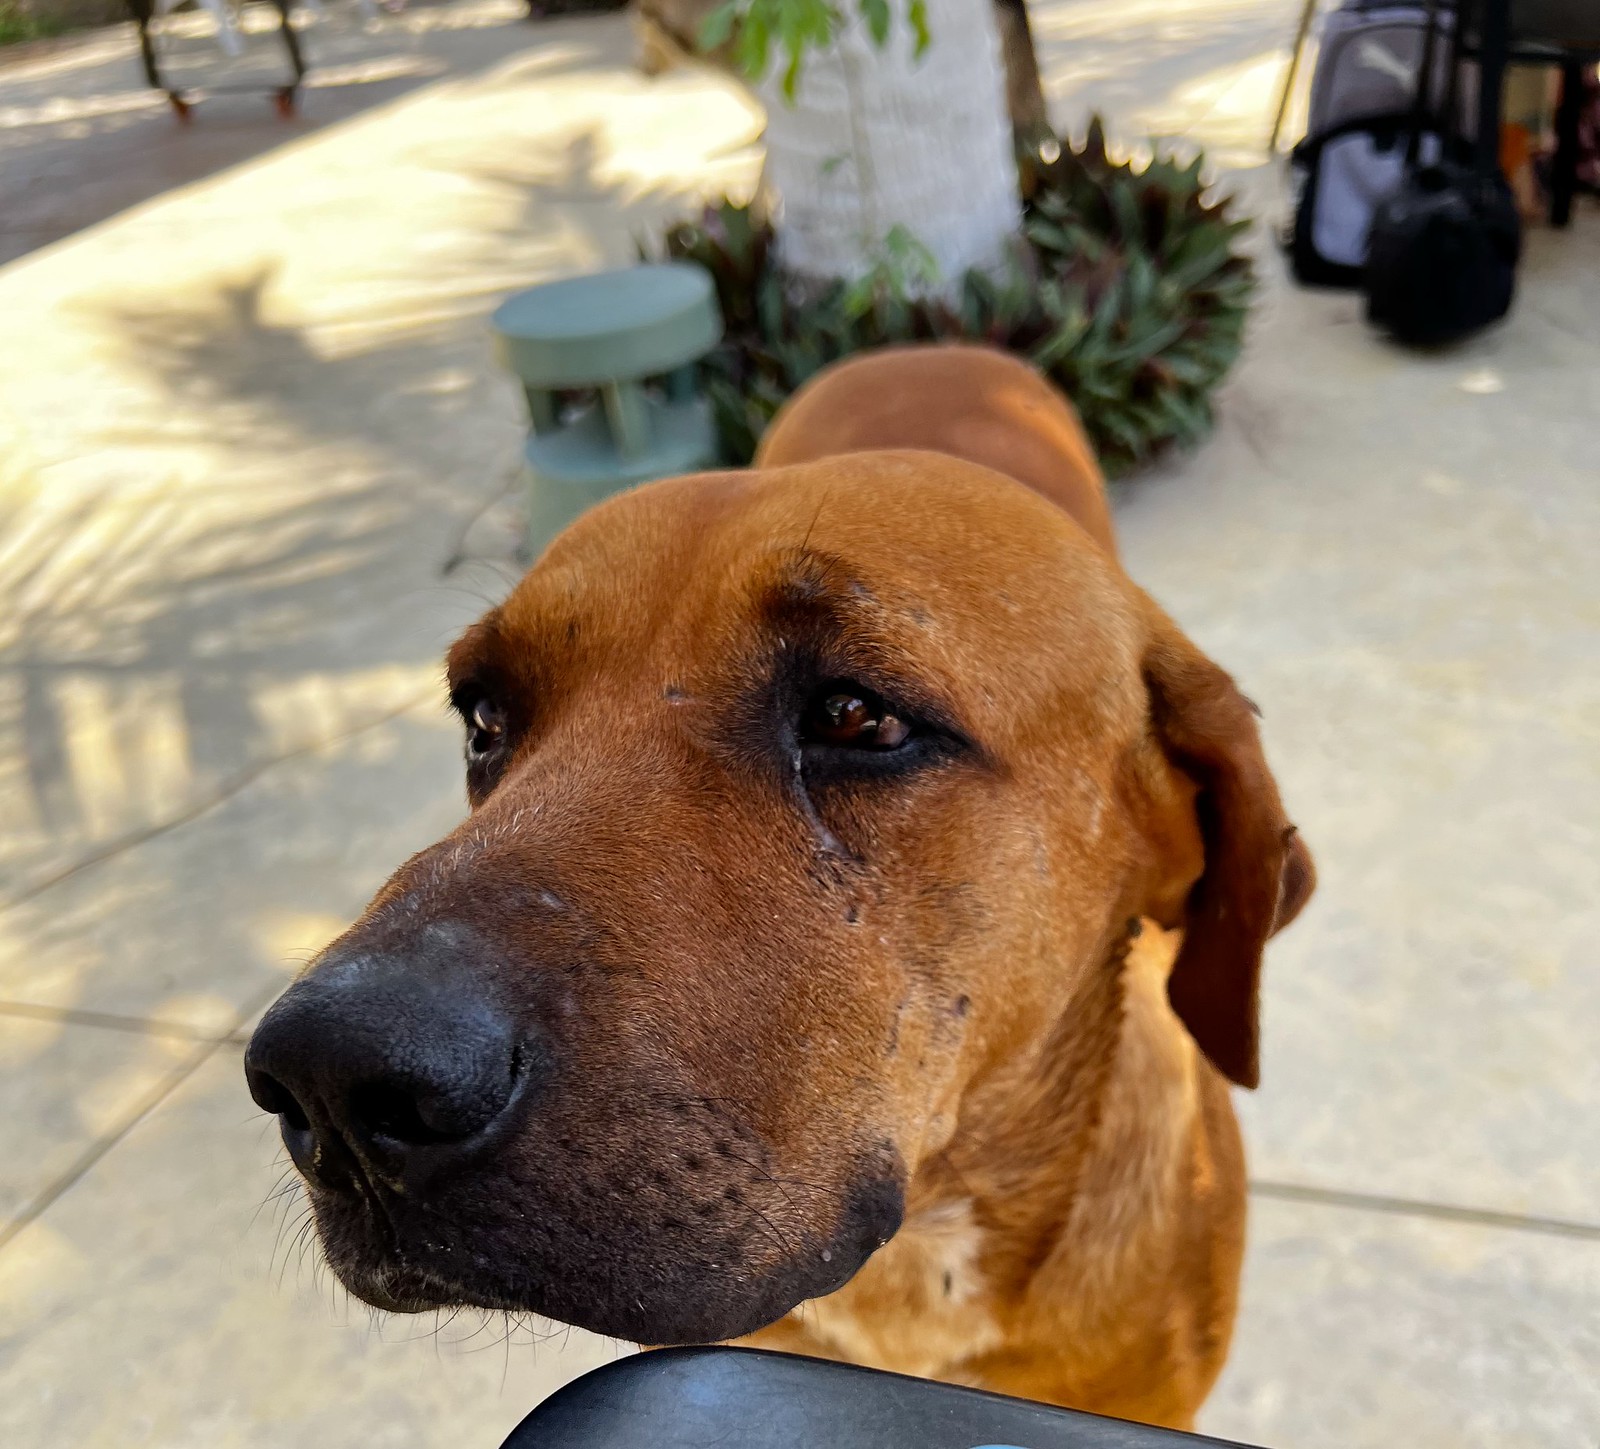 Tropical dog politely waiting for lunch scraps